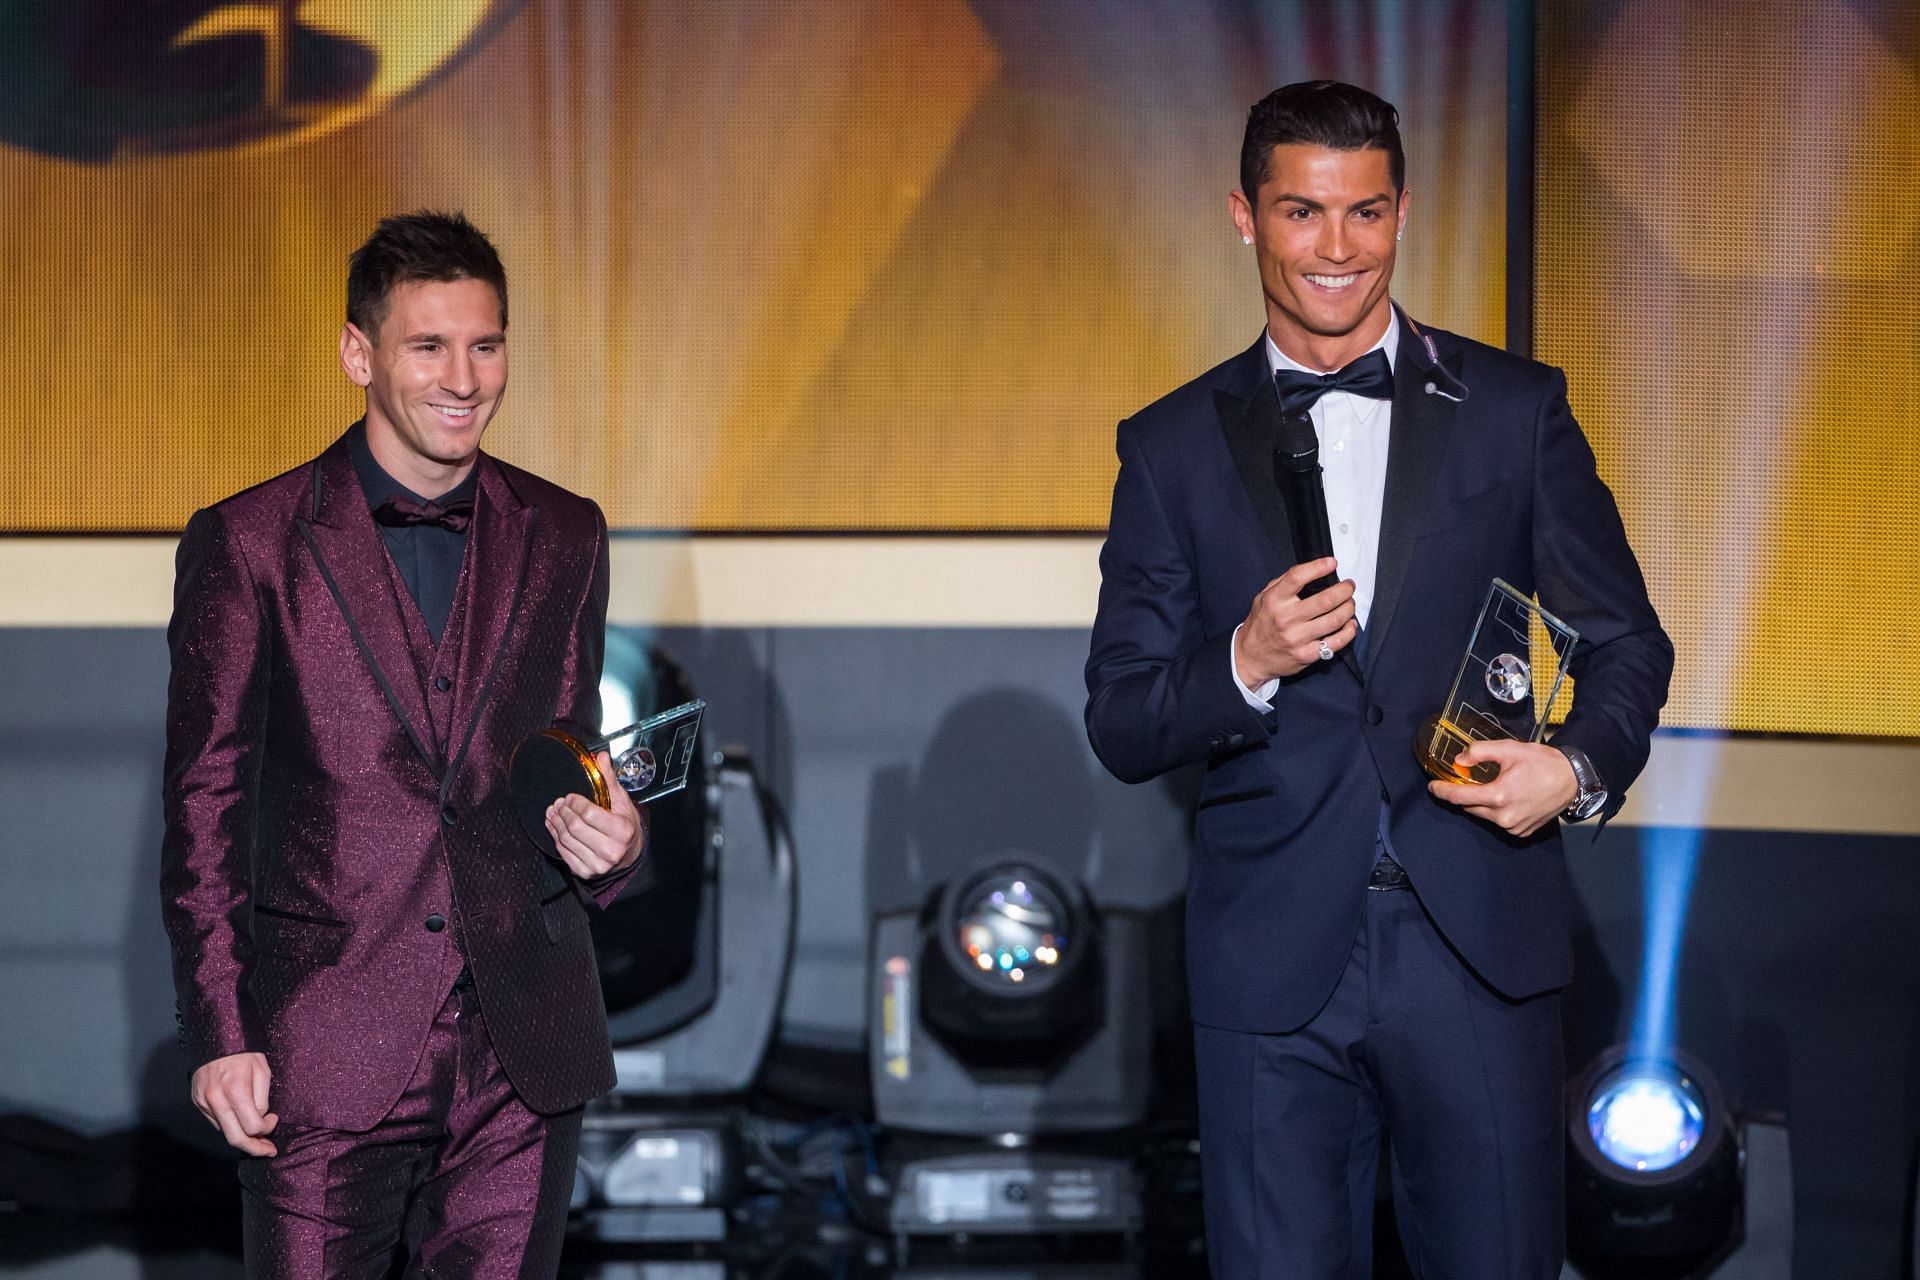 Leo Messi and Cristiano Ronaldo have ruled world football since making their debuts